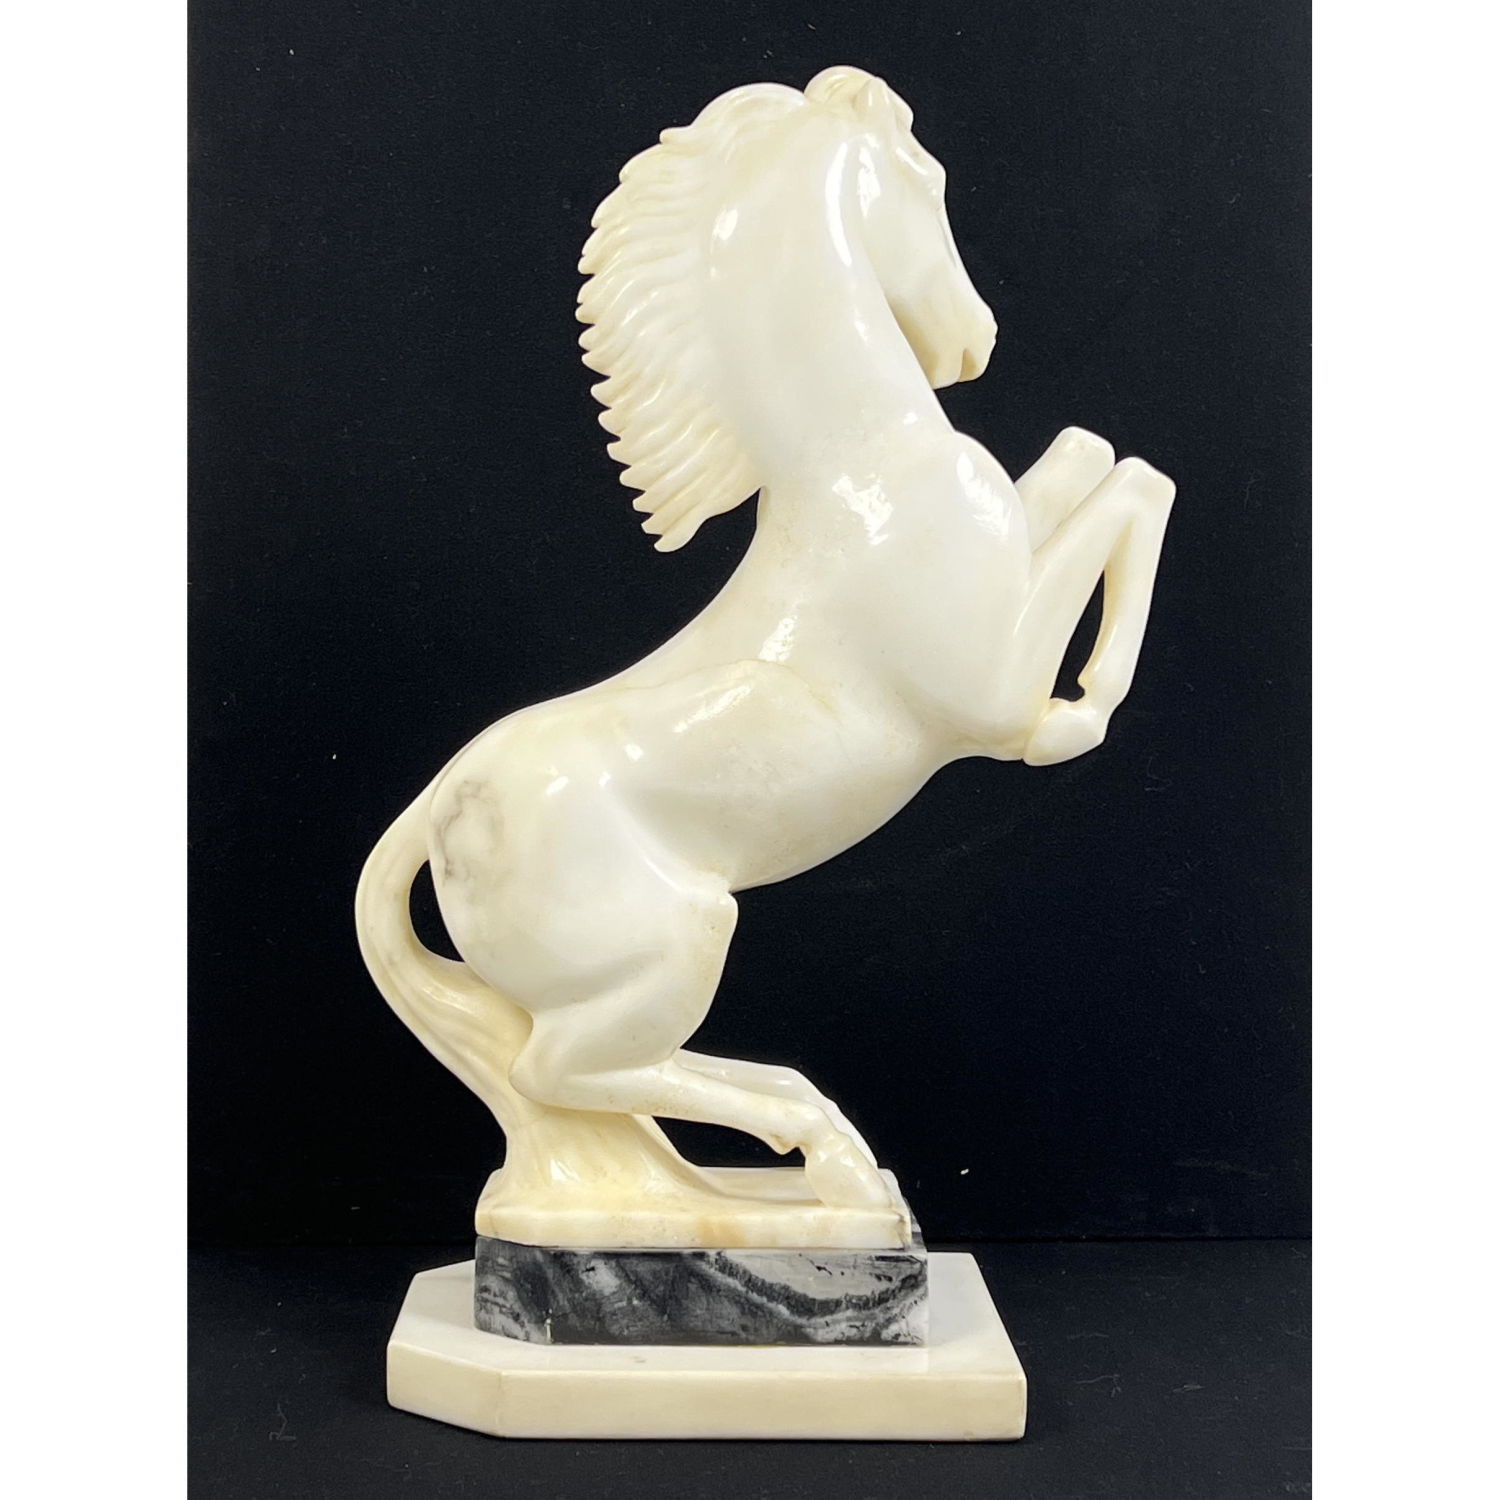 Carved Stone Rearing Horse Sculpture.